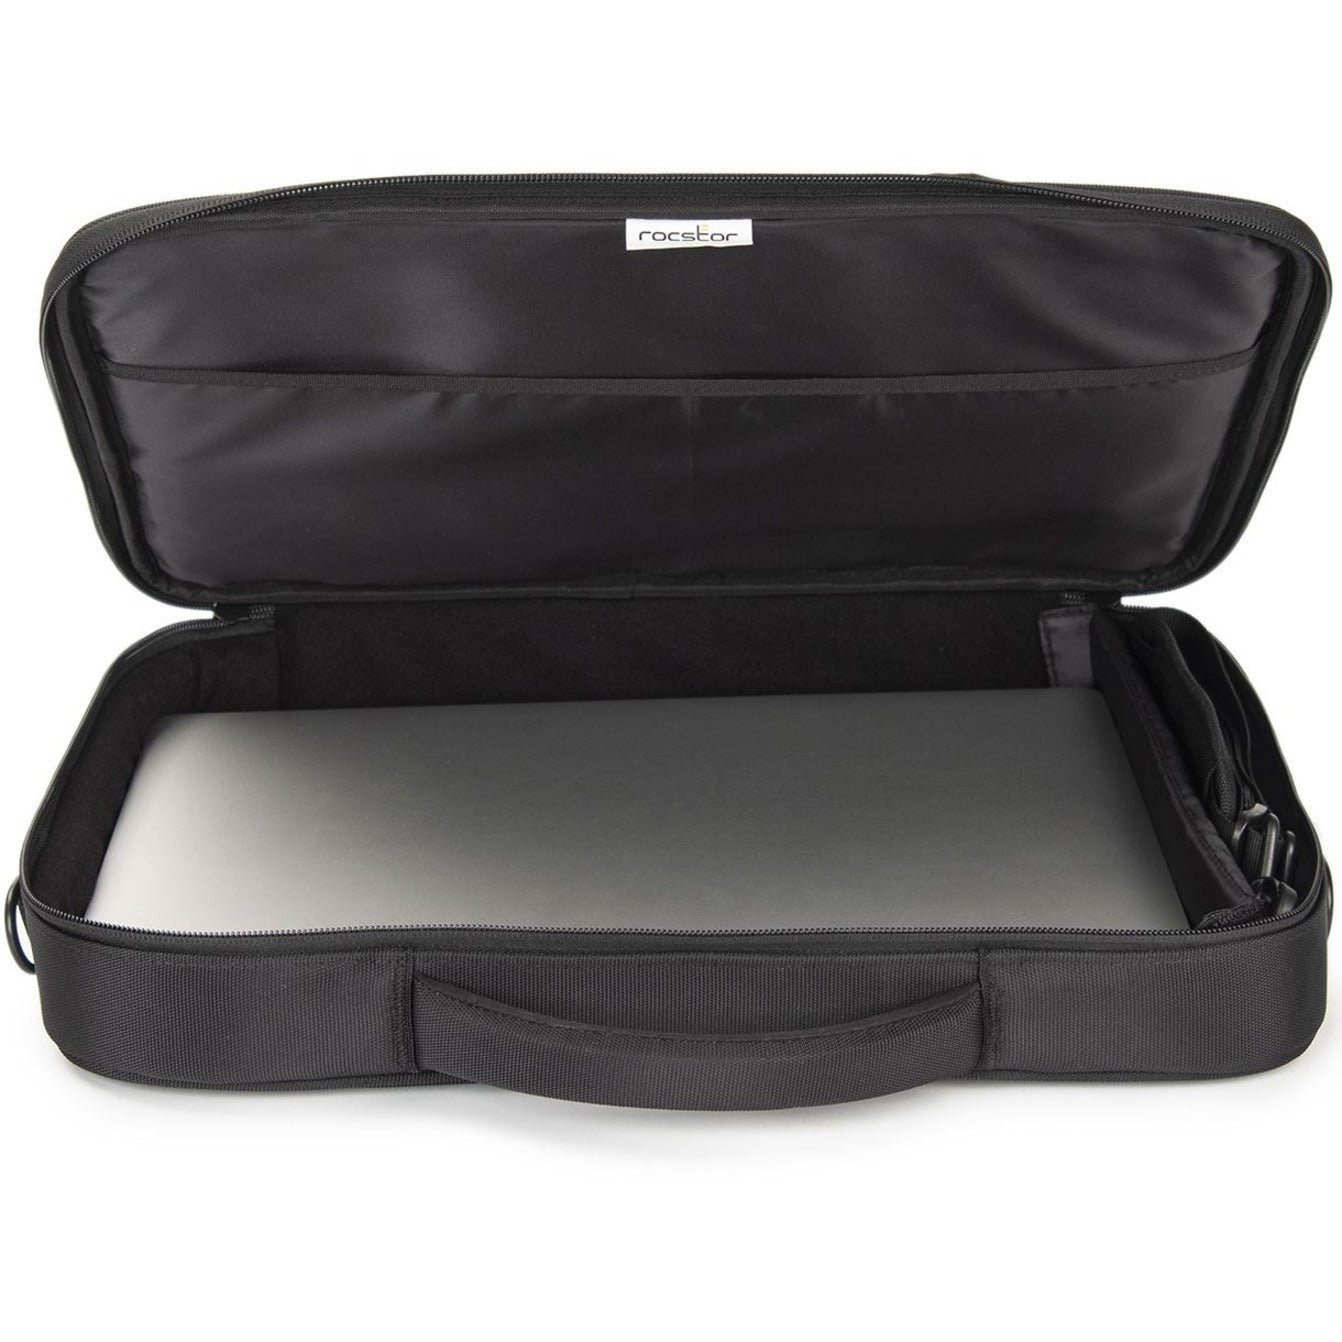 Rocstor Y1CC003-B1 Premium Universal Laptop Carrying Case Frontloading, Fits up to 14.1 Laptop, RFID Pocket